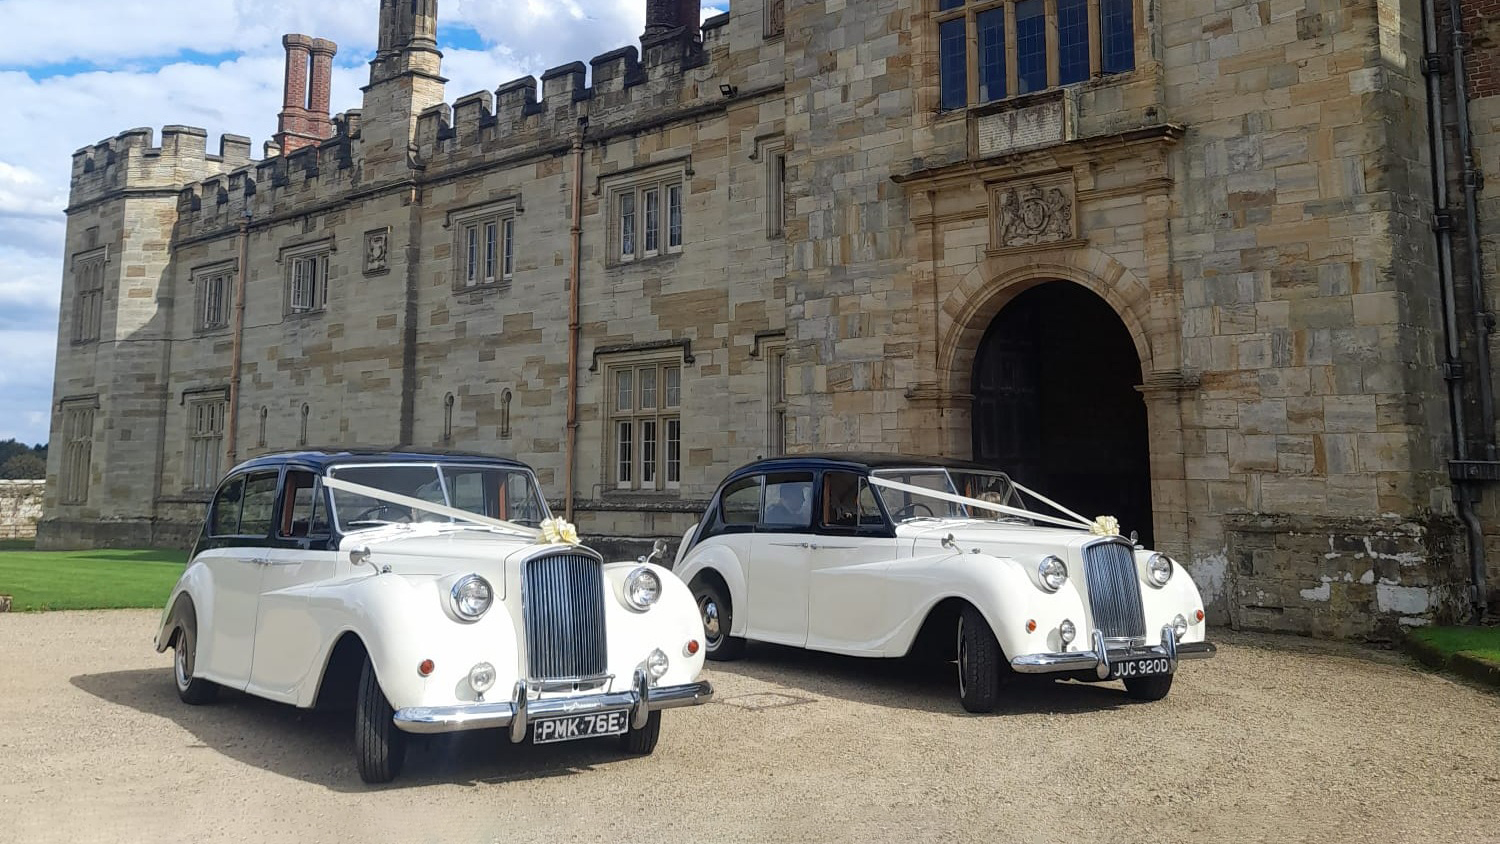 Two Classic Austin Princess Limousine decorated with Ivory Ribbons and Bows on top of the front grill. Vehicles are parked in front of a large manor house in Chatham